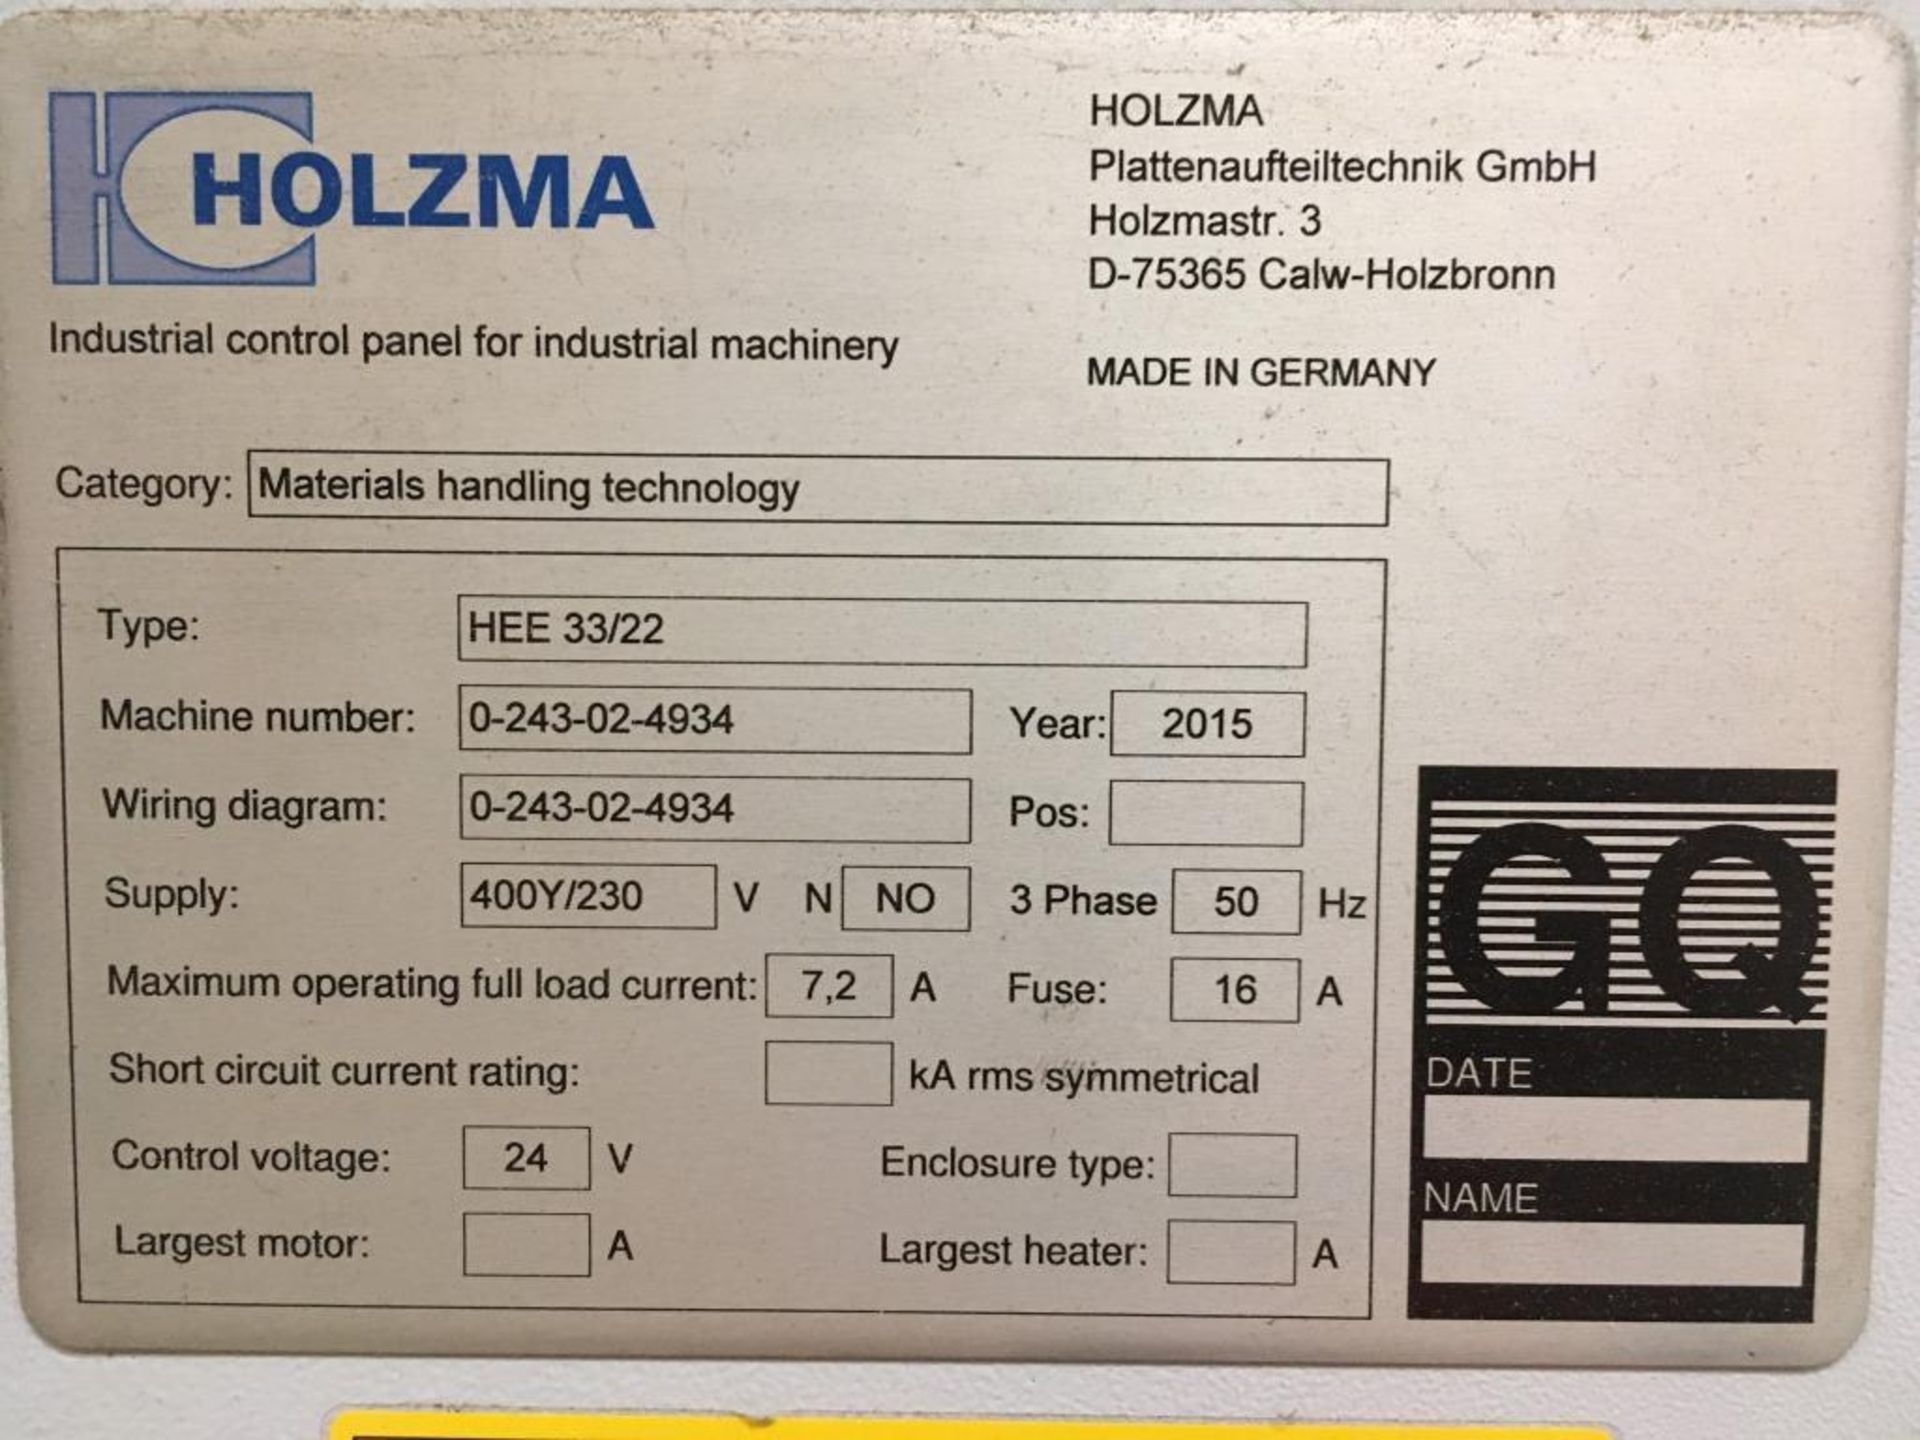 Holzma HPP300 profiLine panel saw, Type: HPP300/38/32, Serial No. 0-240-02-4932, Year of - Image 8 of 12